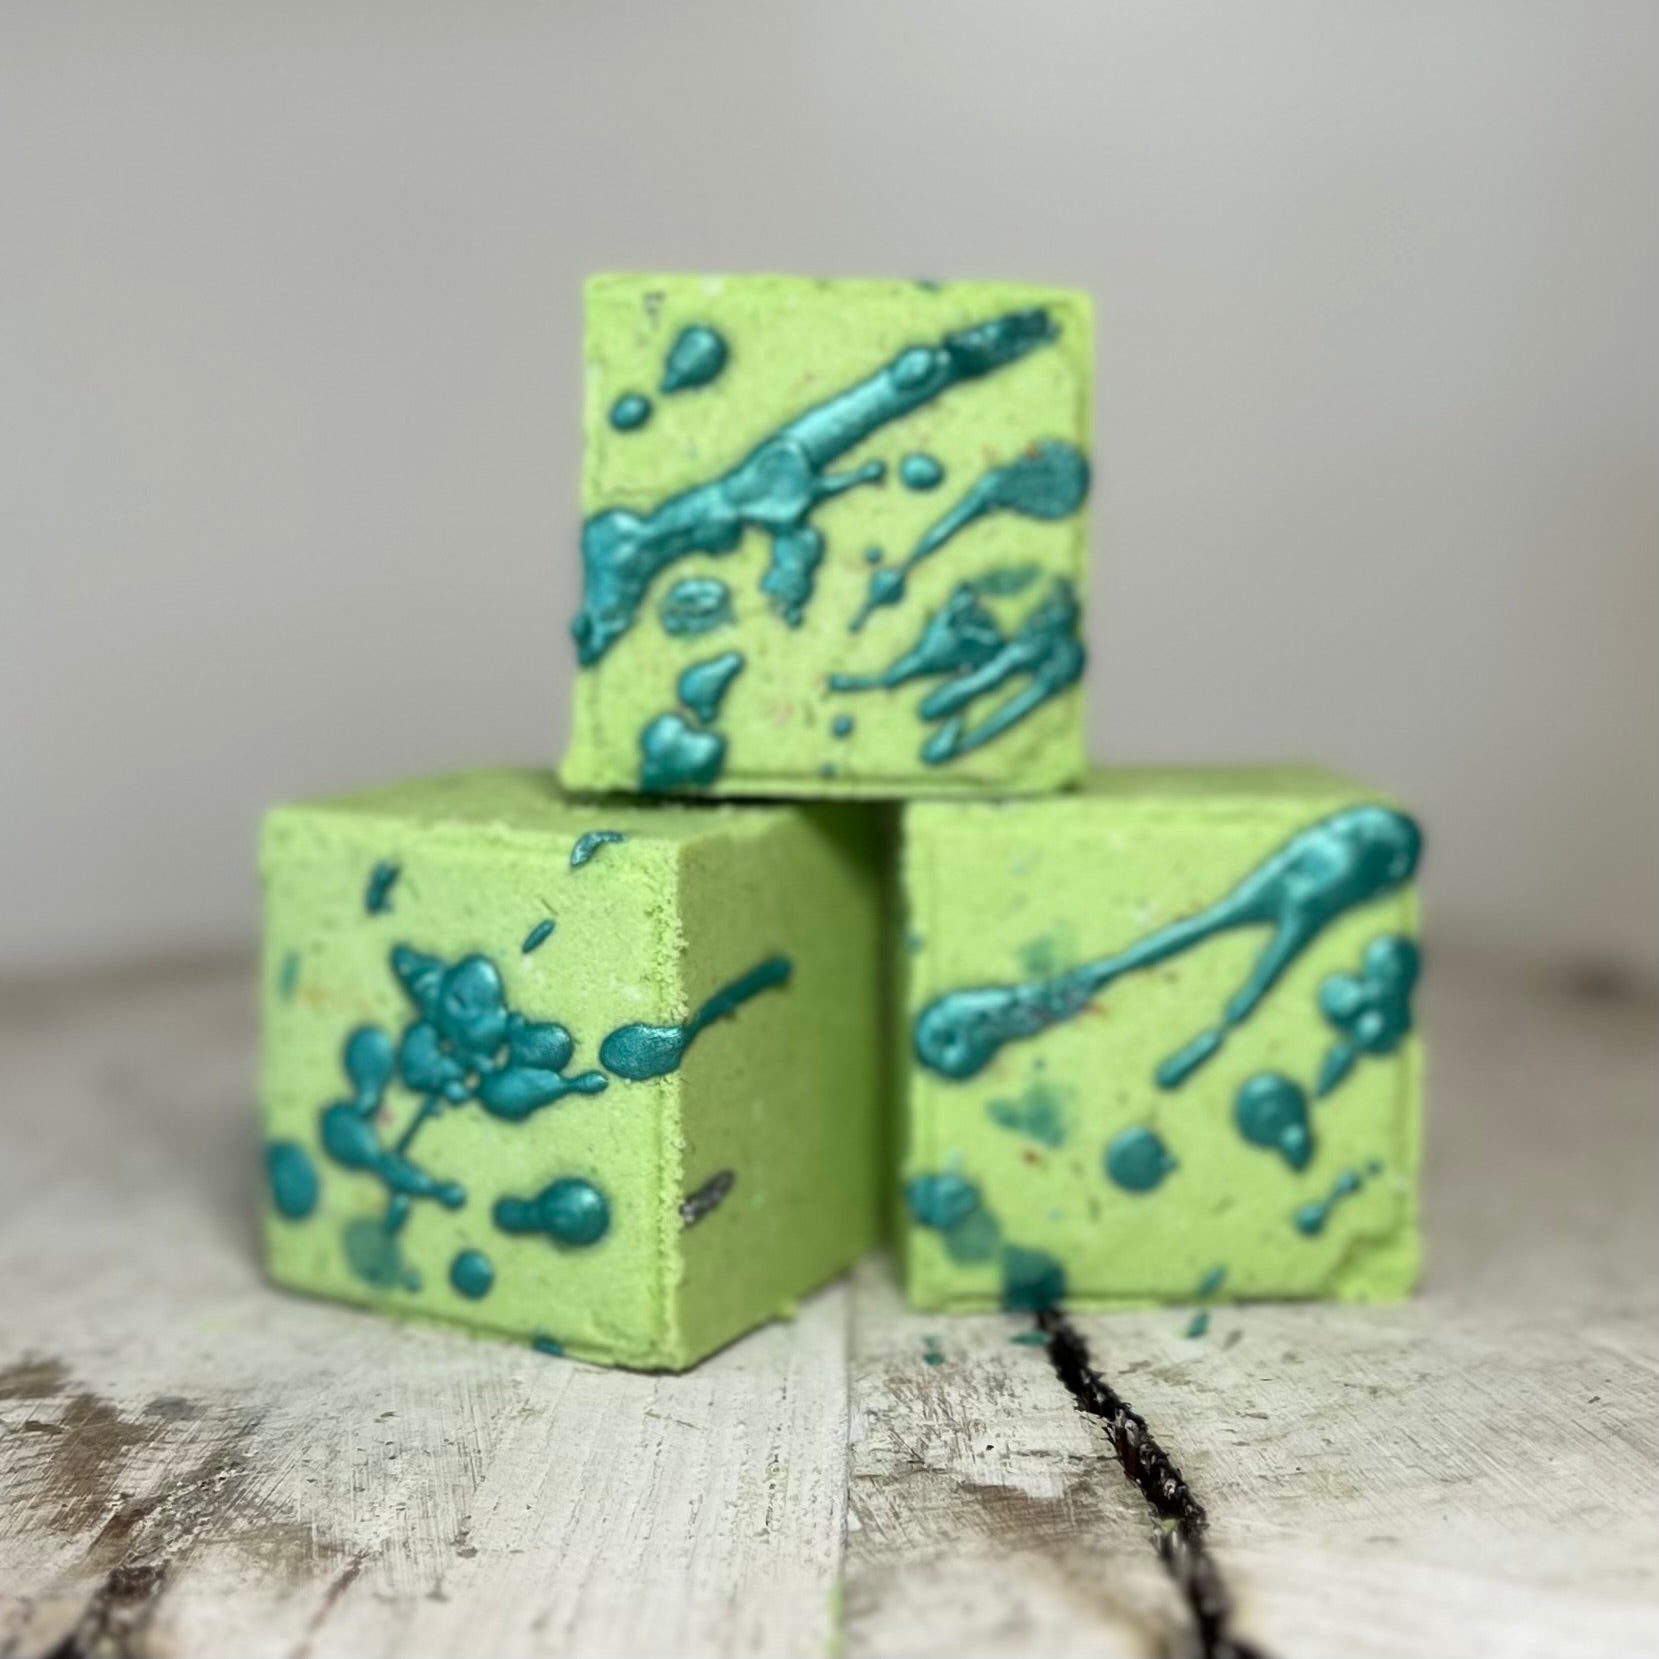 Create Your Own Bath Bomb - The Wooden Boar Soap Company